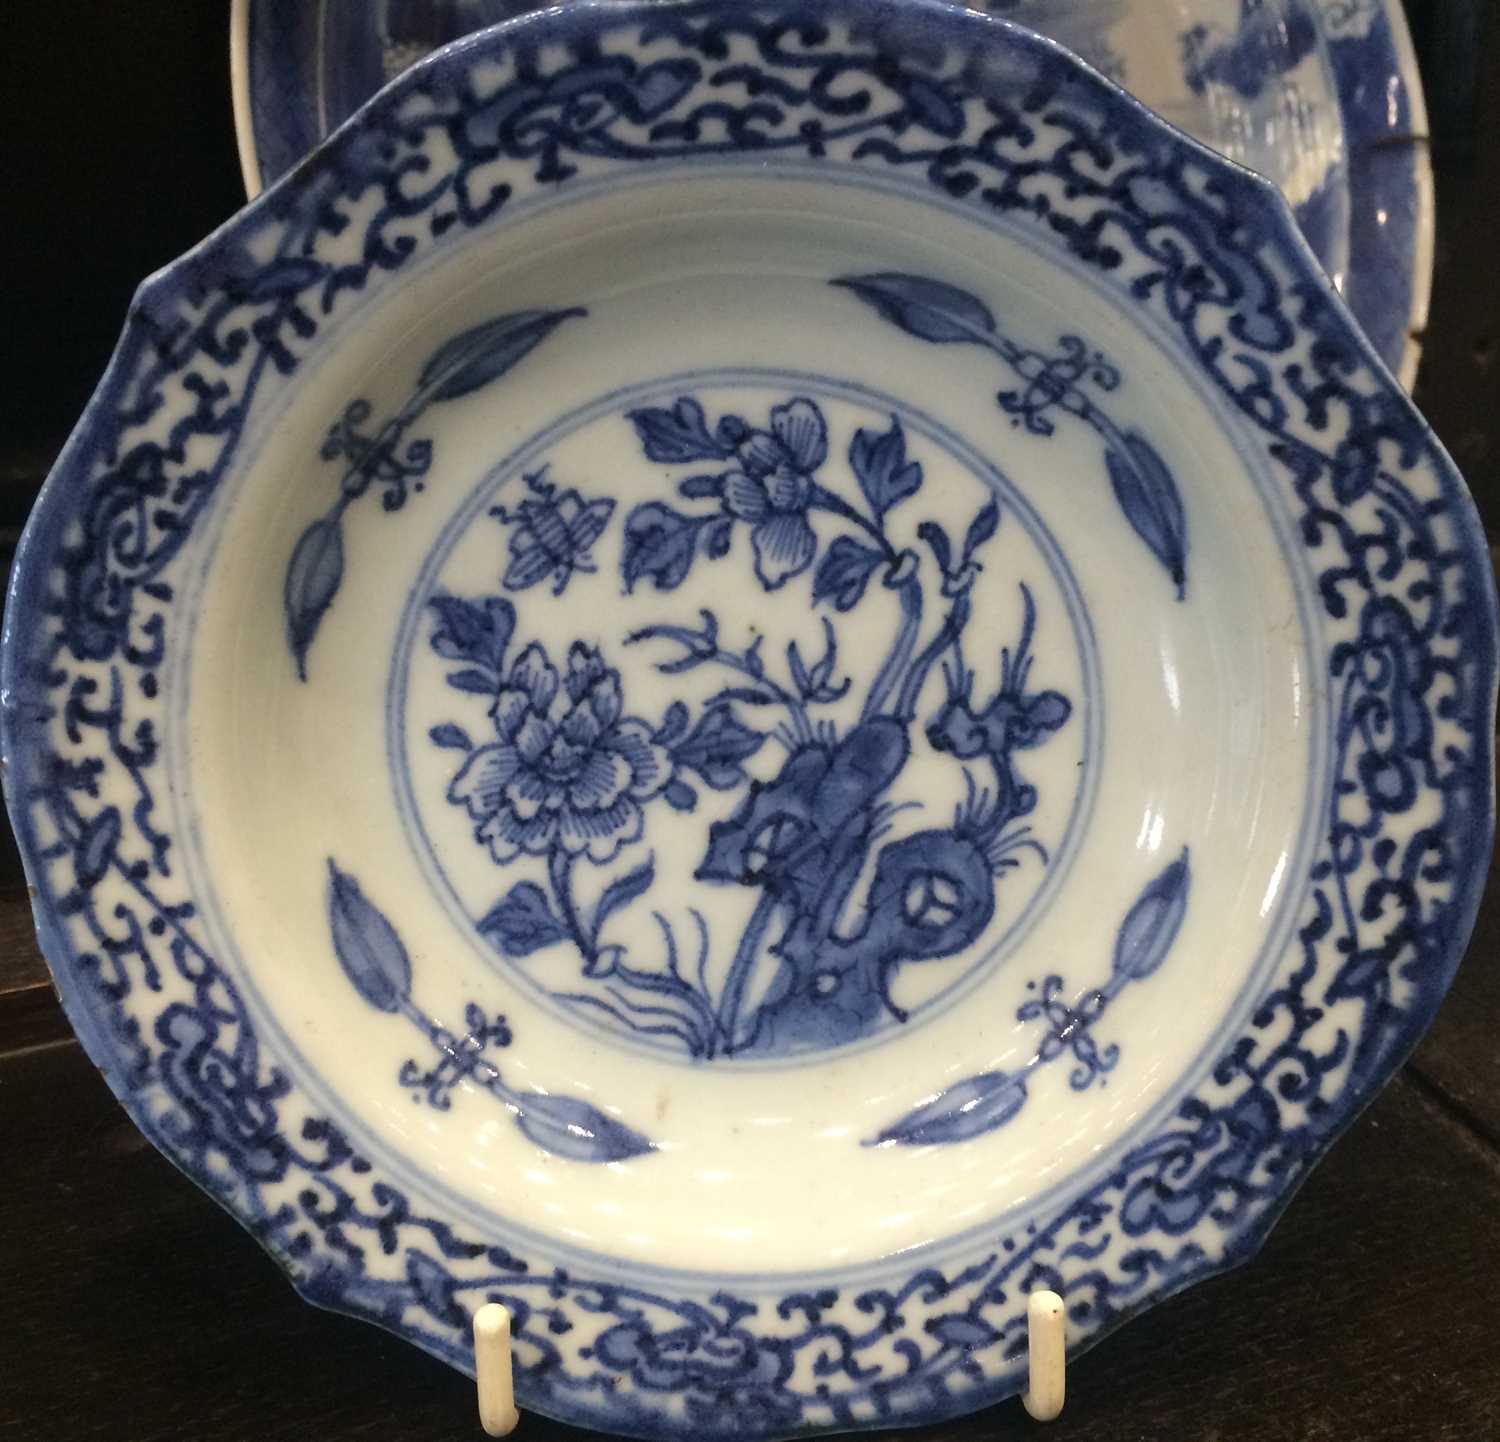 A Chinese Porcelain Bowl and Cover, 17th century style, painted in underglaze blue with ducks in a - Image 15 of 19